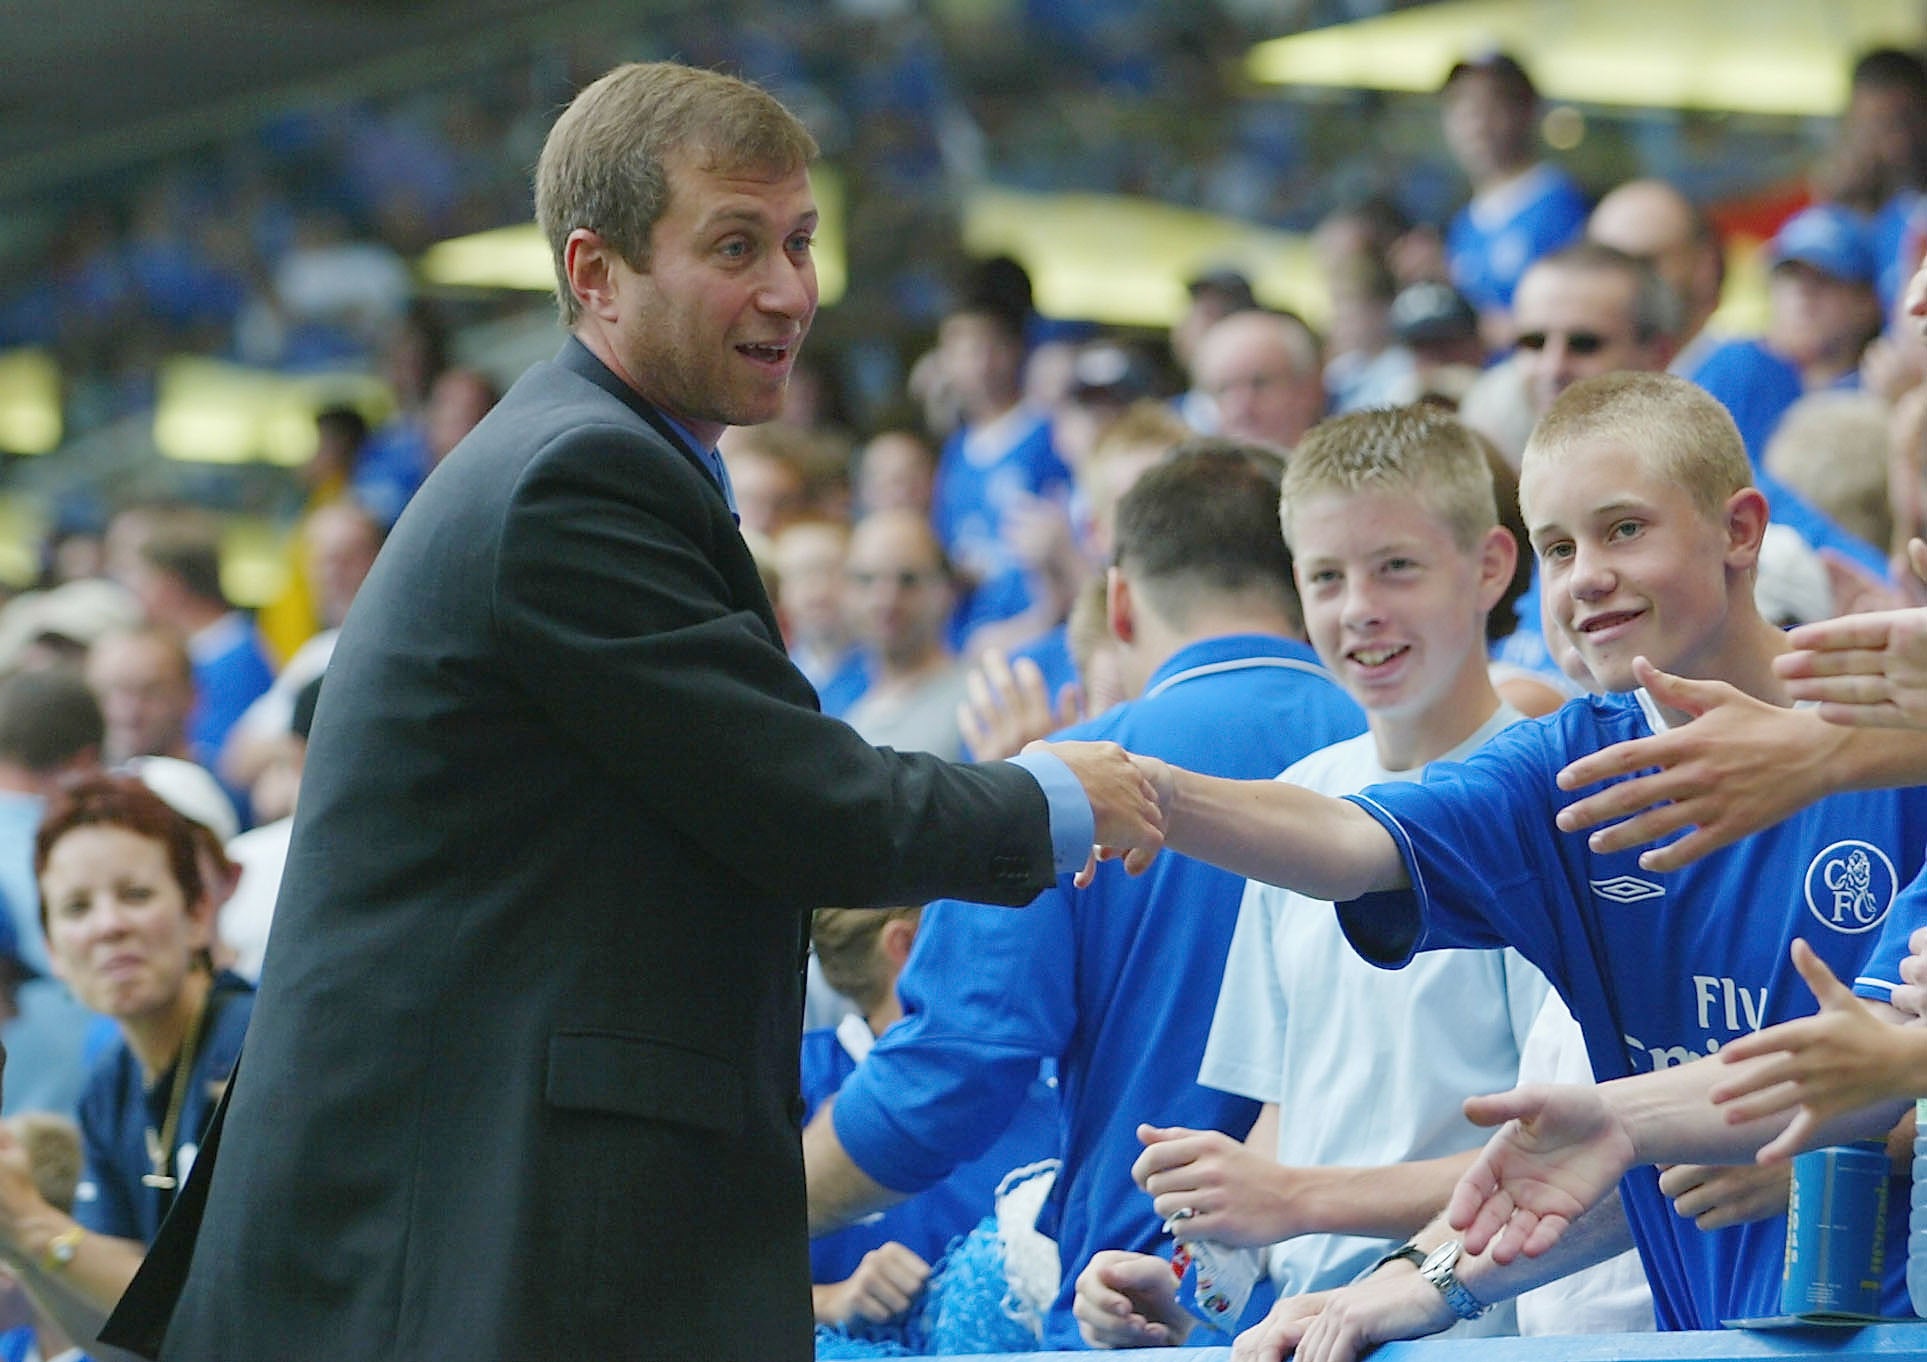 Abramovich purchased Chelsea in 2003